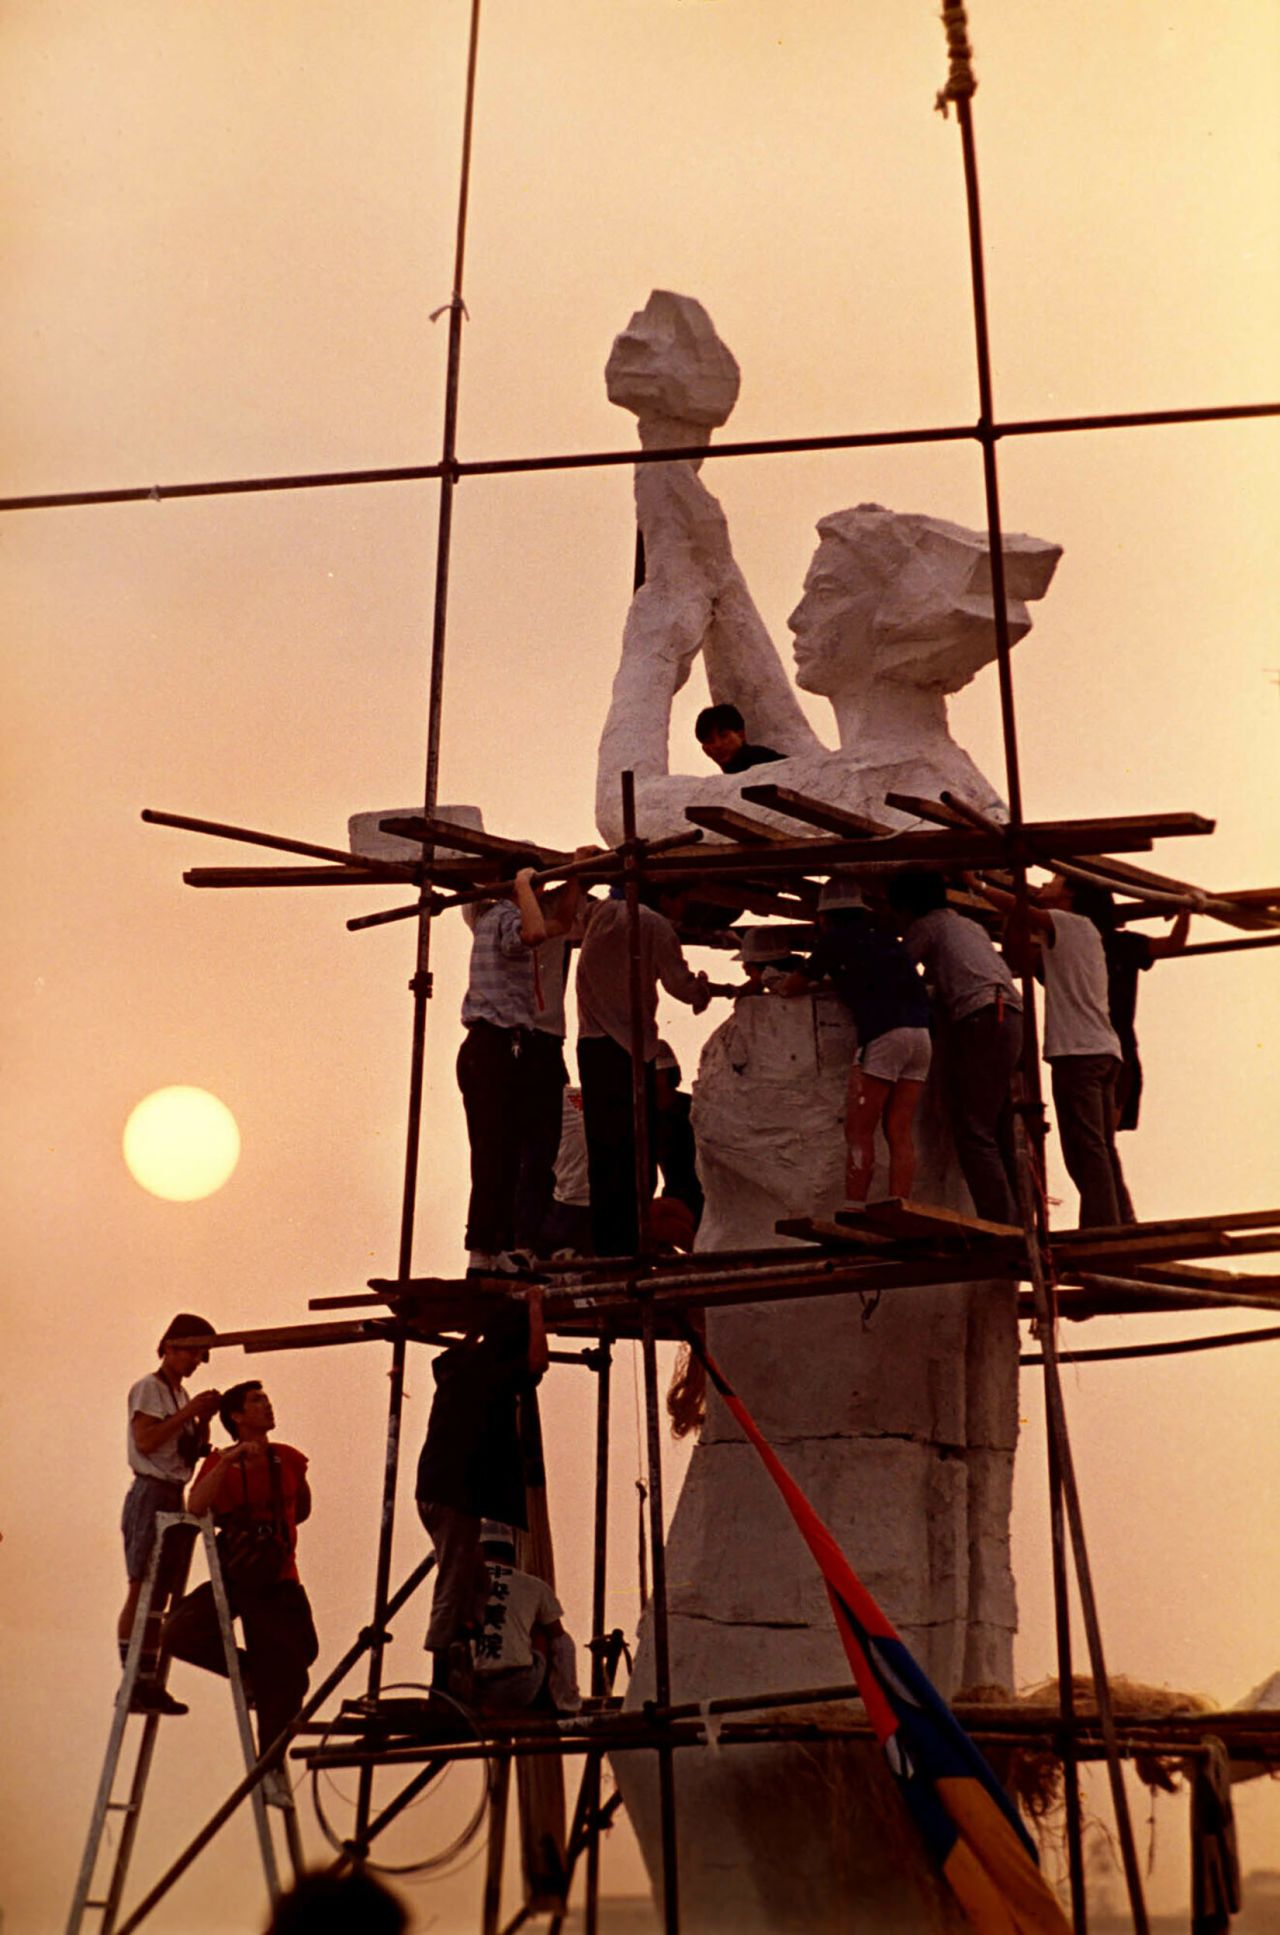 Students assemble the statue, which was made from Styrofoam and plaster, in Tiananmen Square.